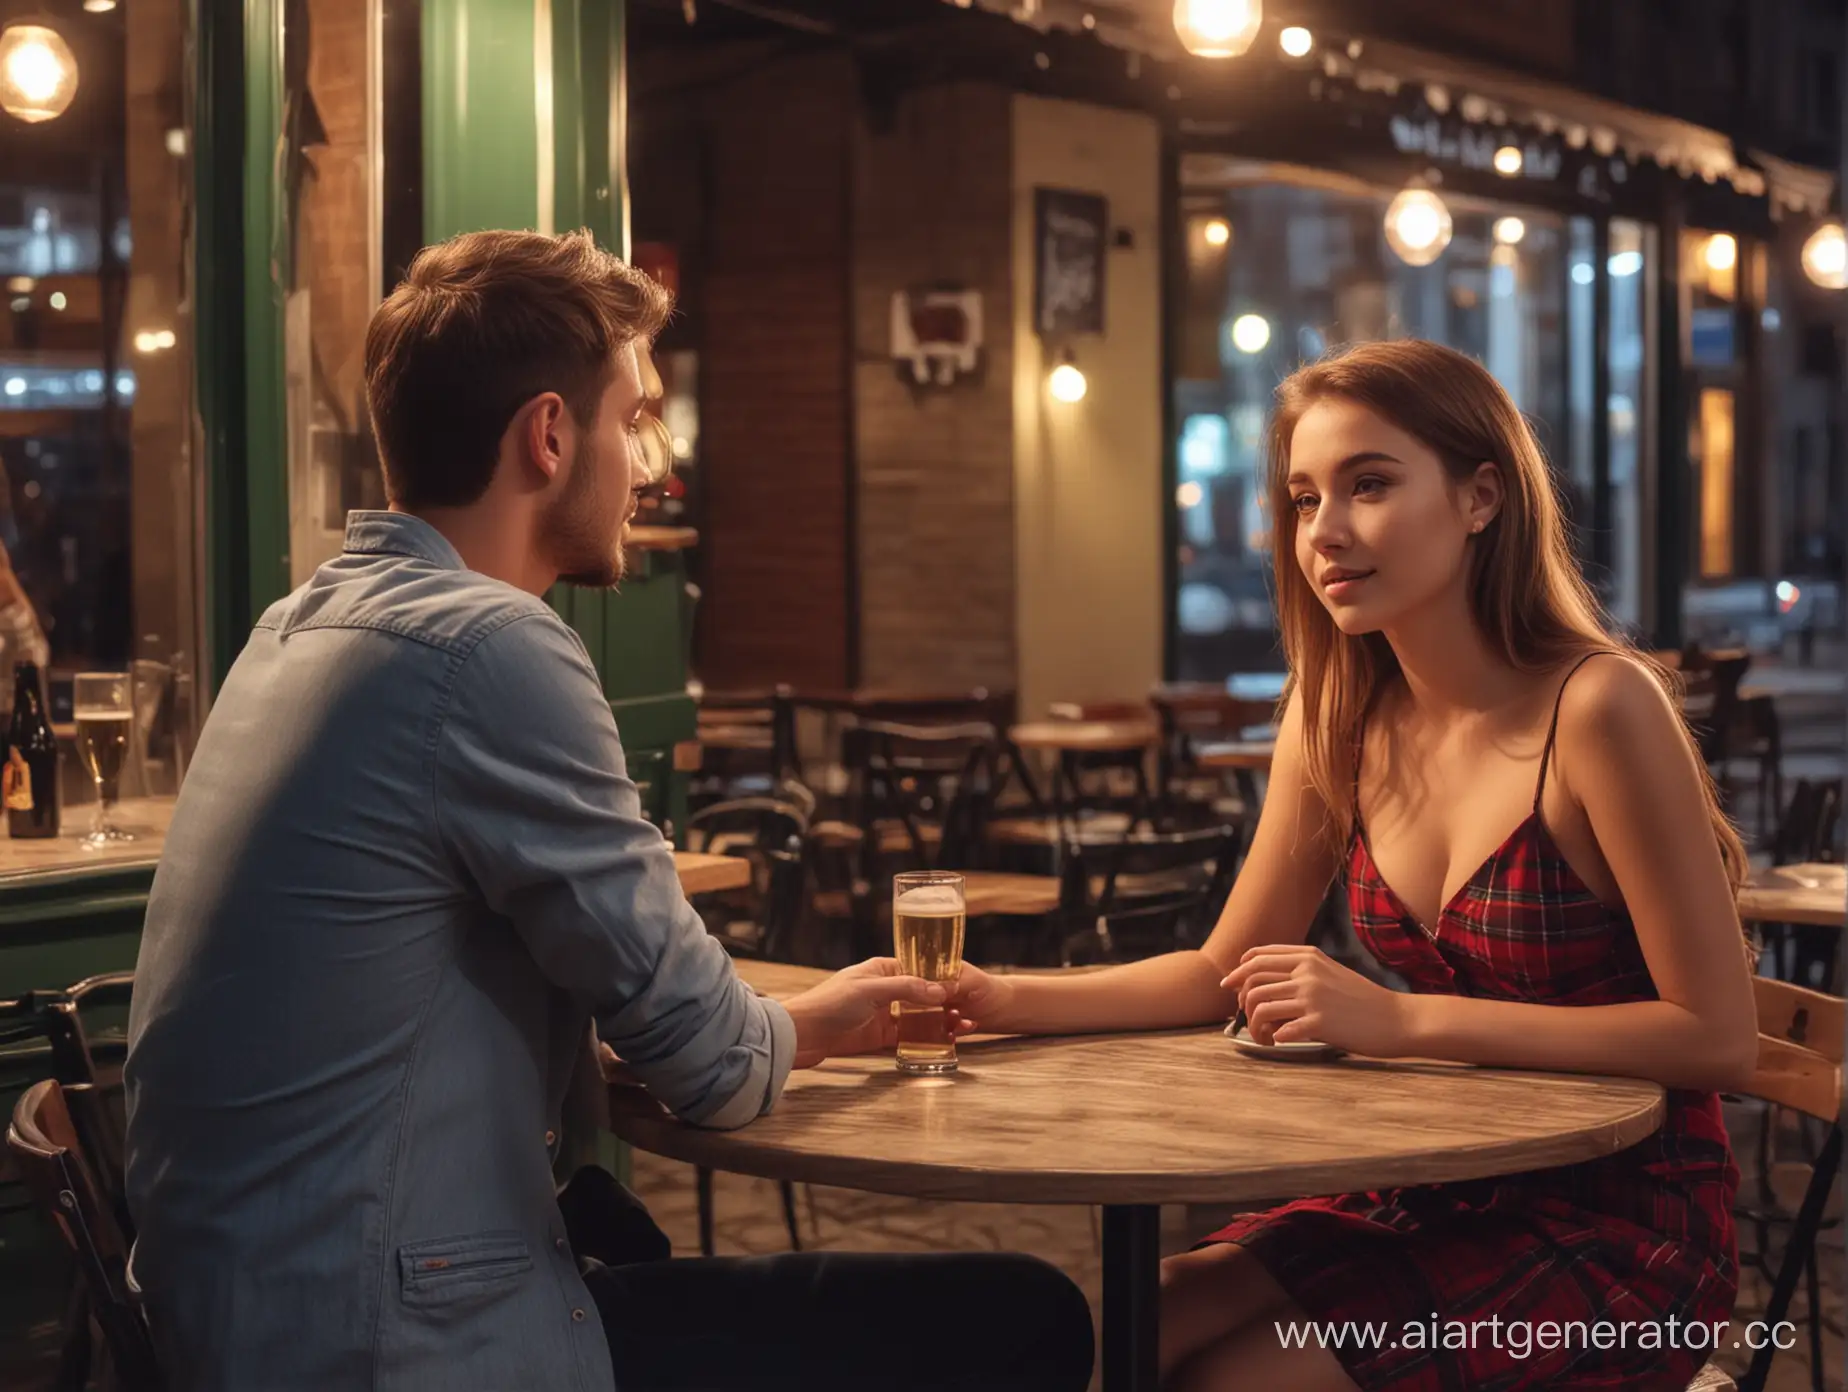 Romantic-Evening-at-the-Cafe-Seductive-Pickup-Encounter